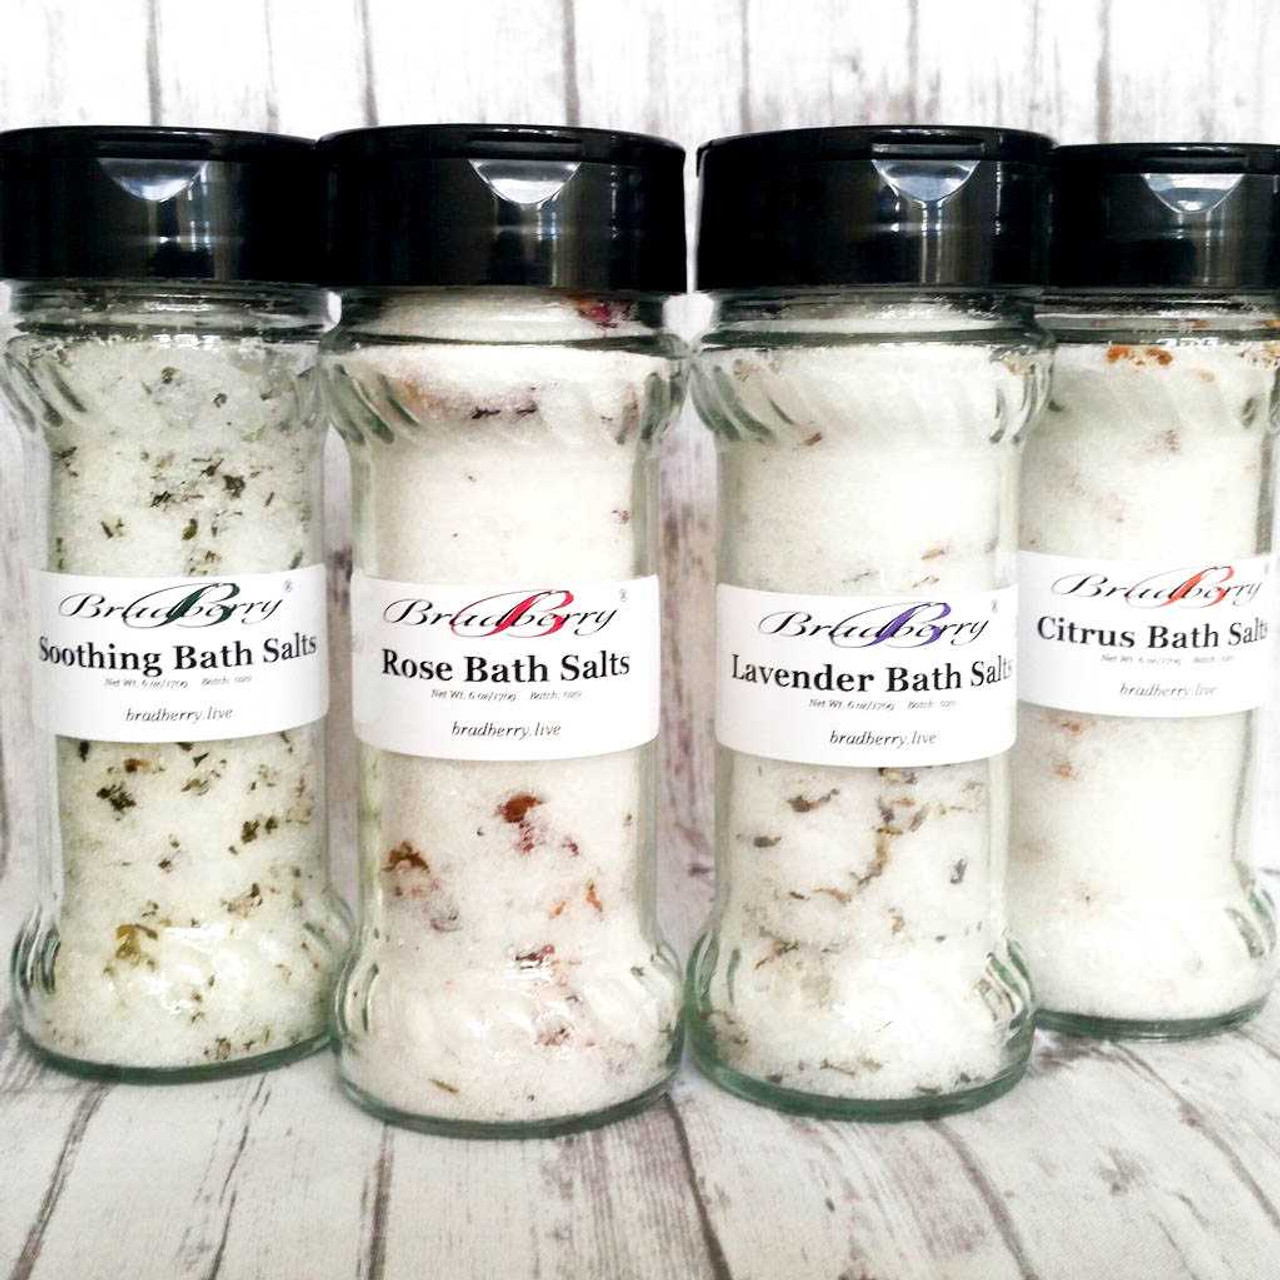 Adjustable Glass Spice Jars- Set of 6 Sleek Seasoning Shaker Rub Container  Tins with 6 Pouring Sizes